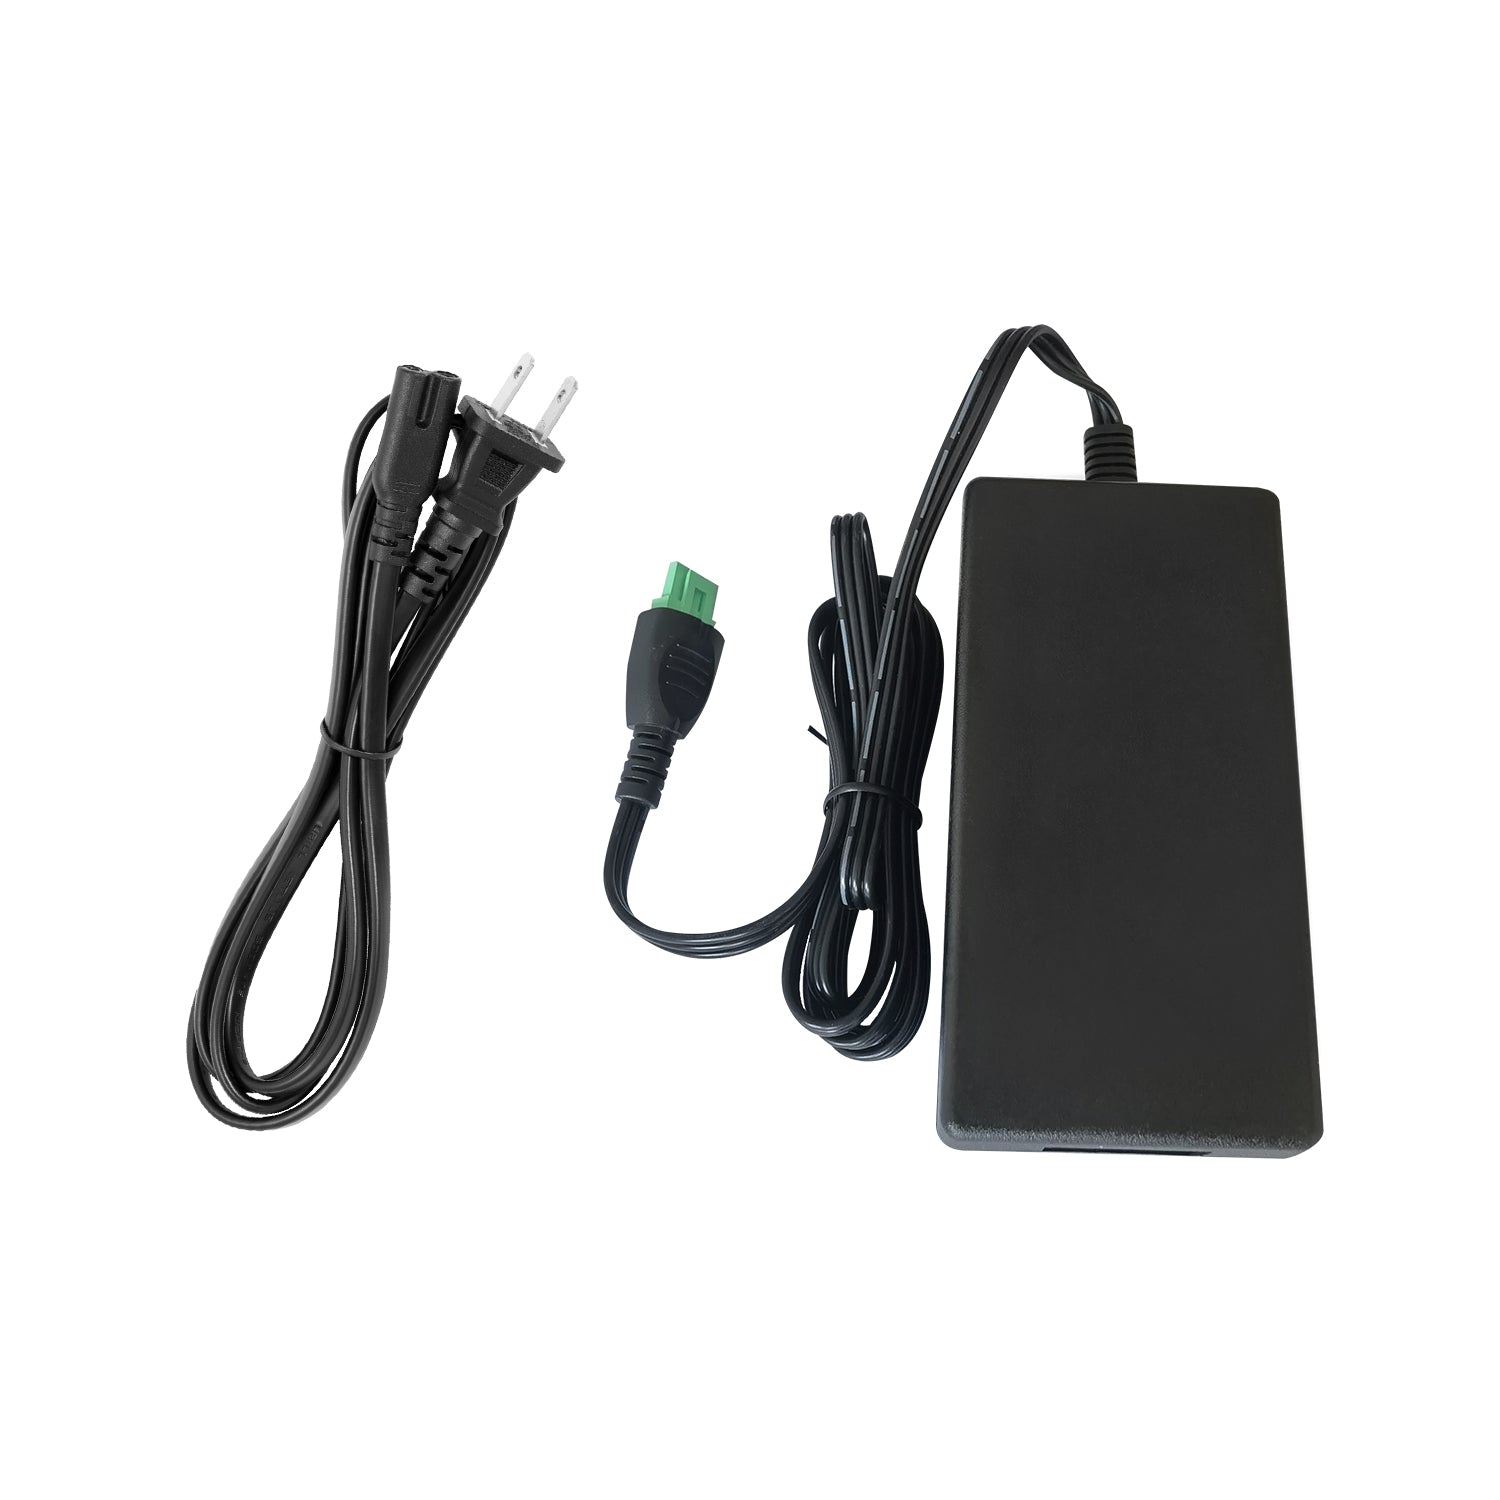 Power Adapter for HP Officejet 6600 All-in-One Printer.